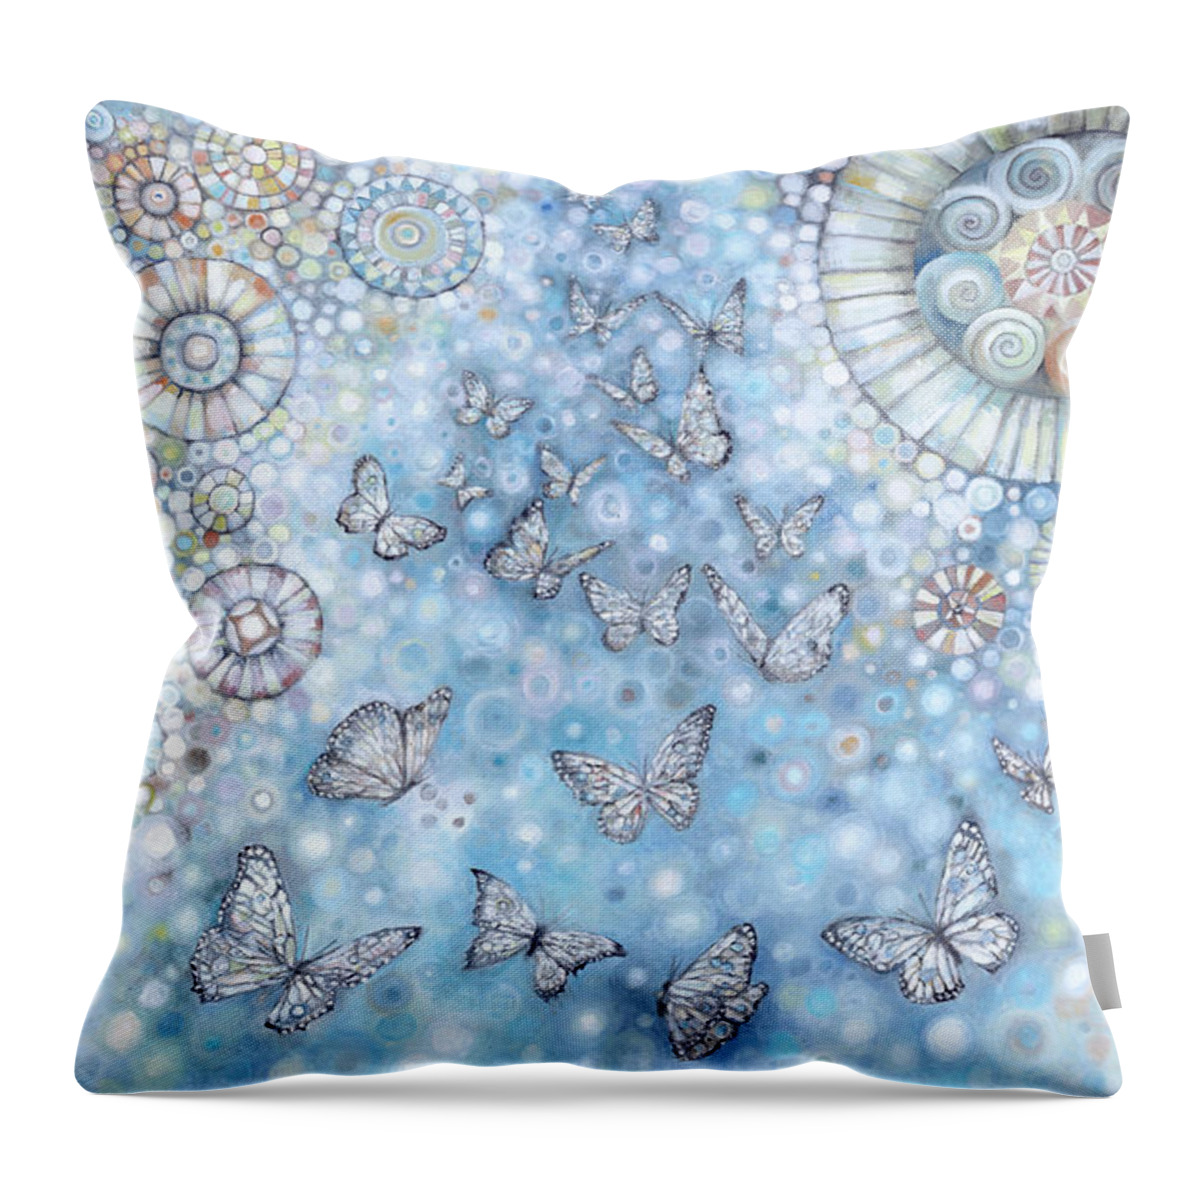 Butterfly Throw Pillow featuring the painting Will of Happiness by Manami Lingerfelt